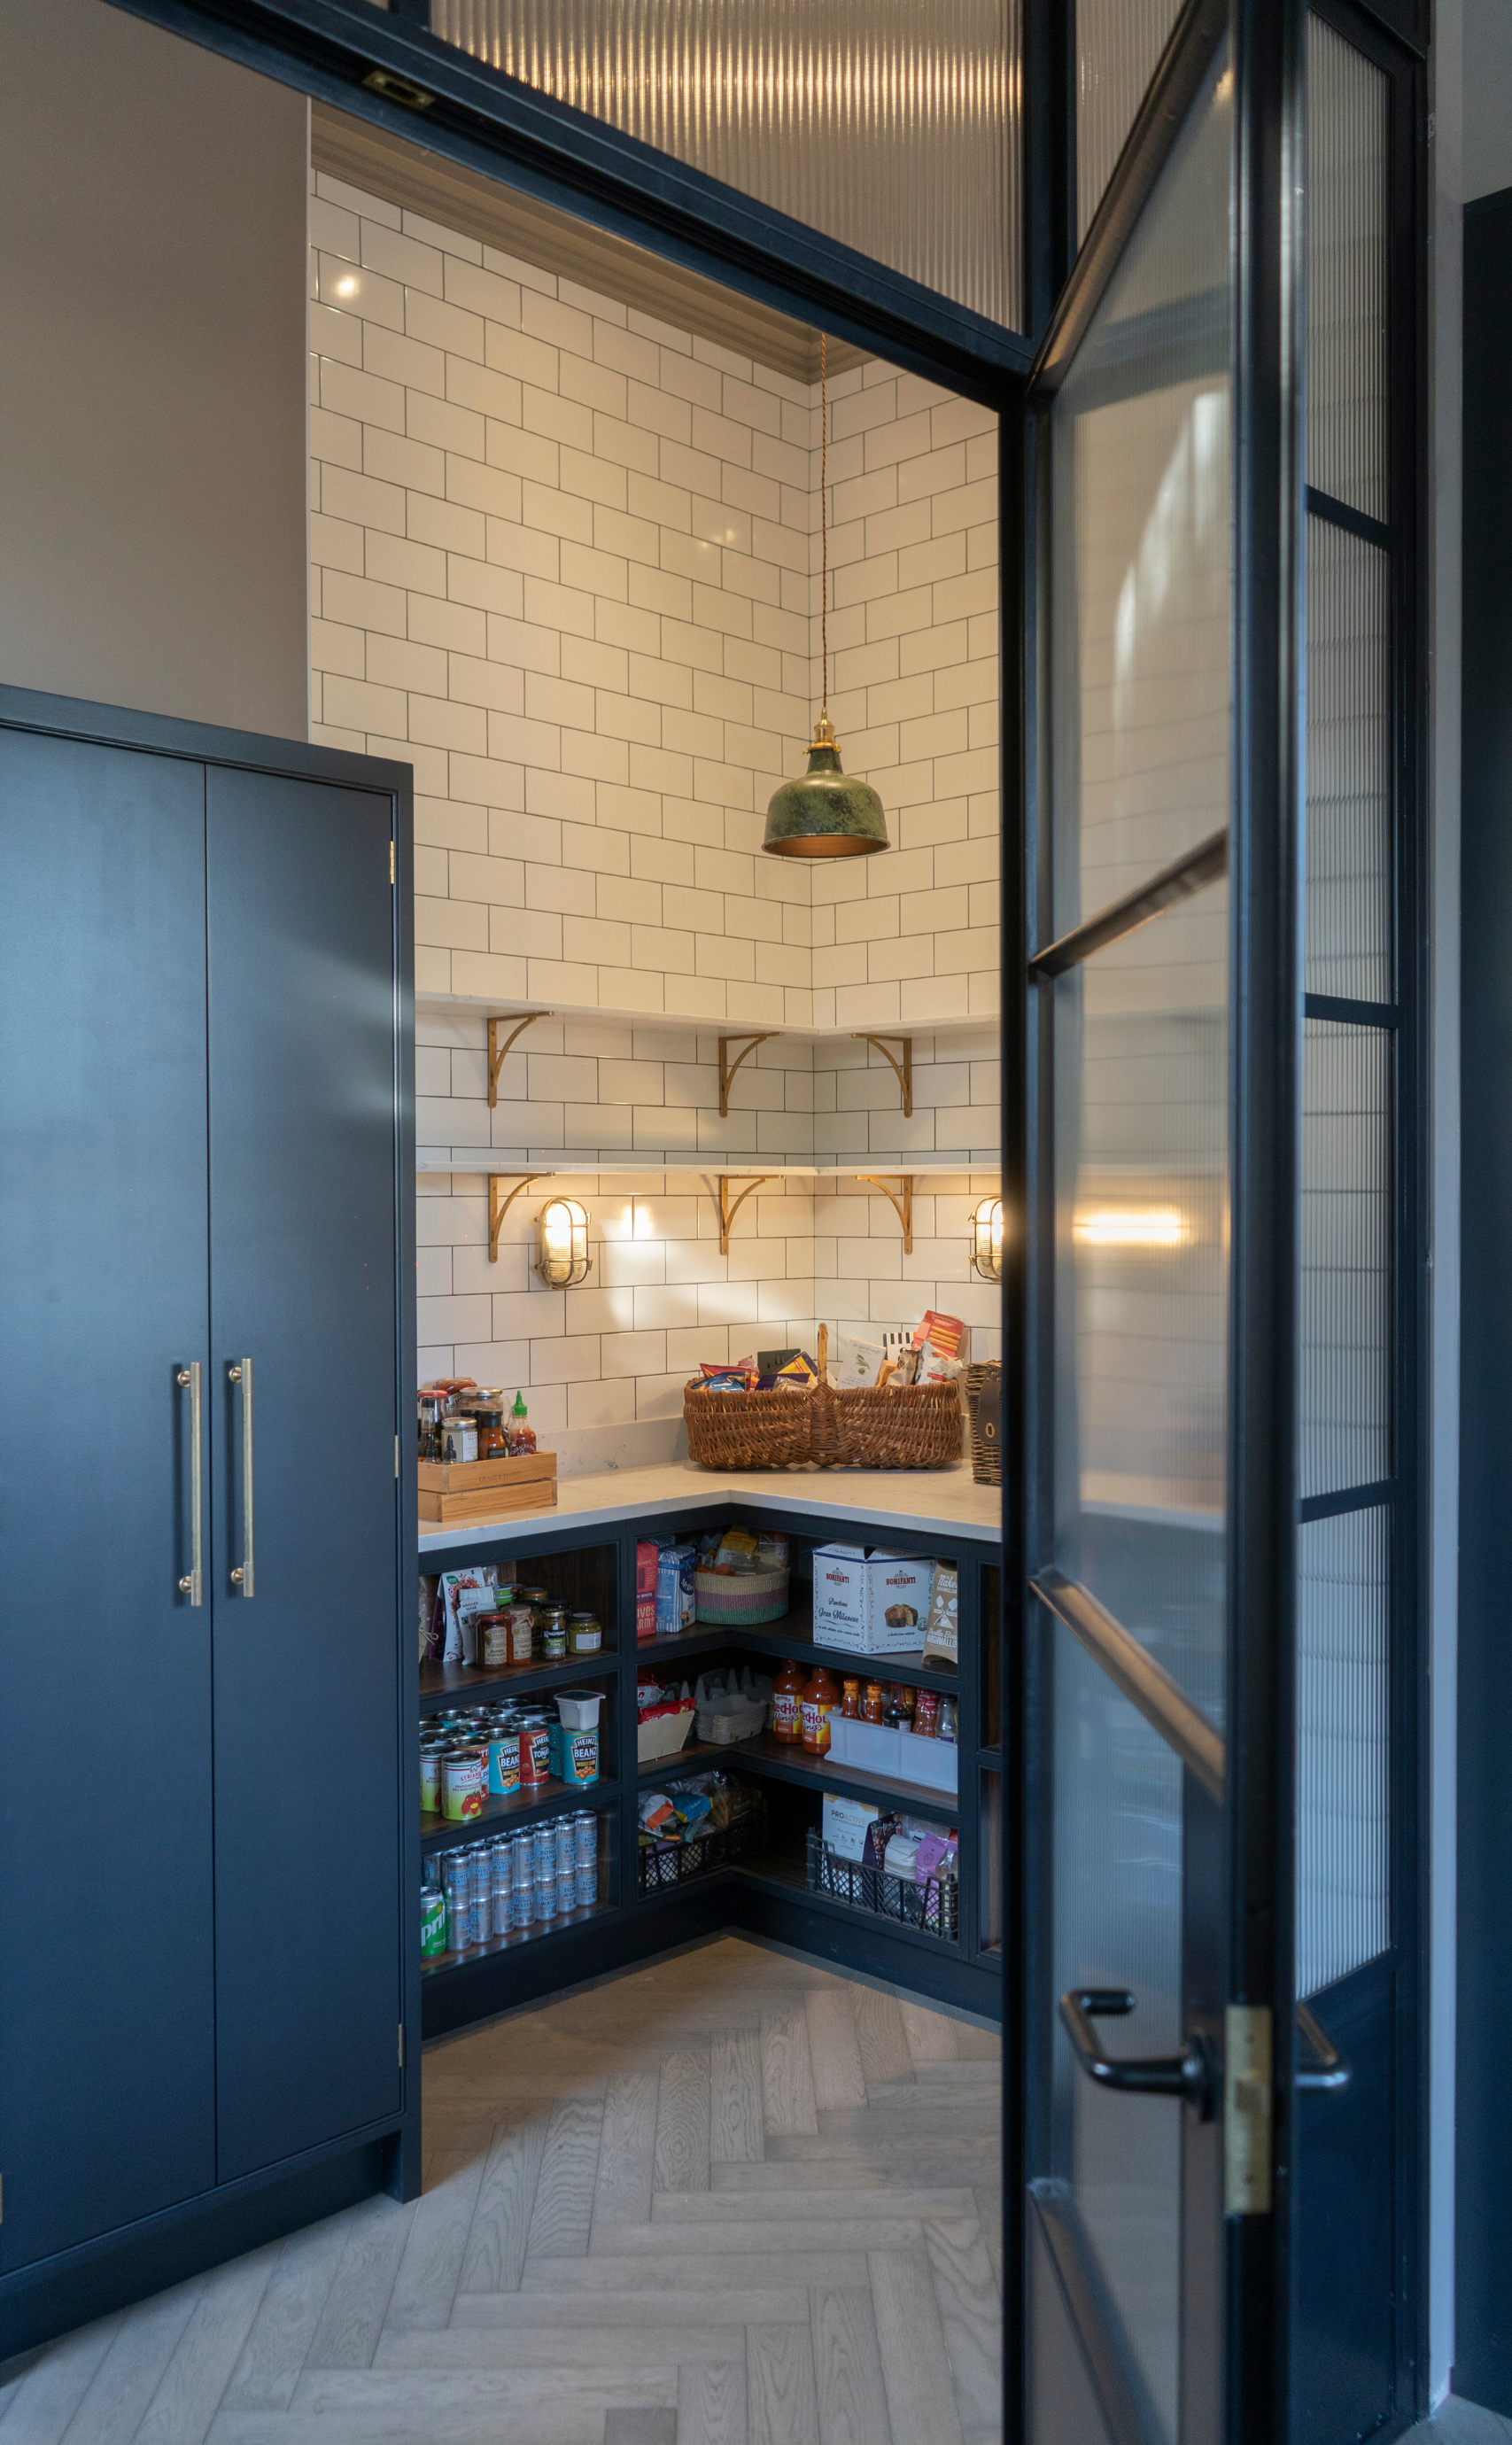 Kitchen Pantry, open shelved, blue cabinetry with white worktop, seen through crittall doors